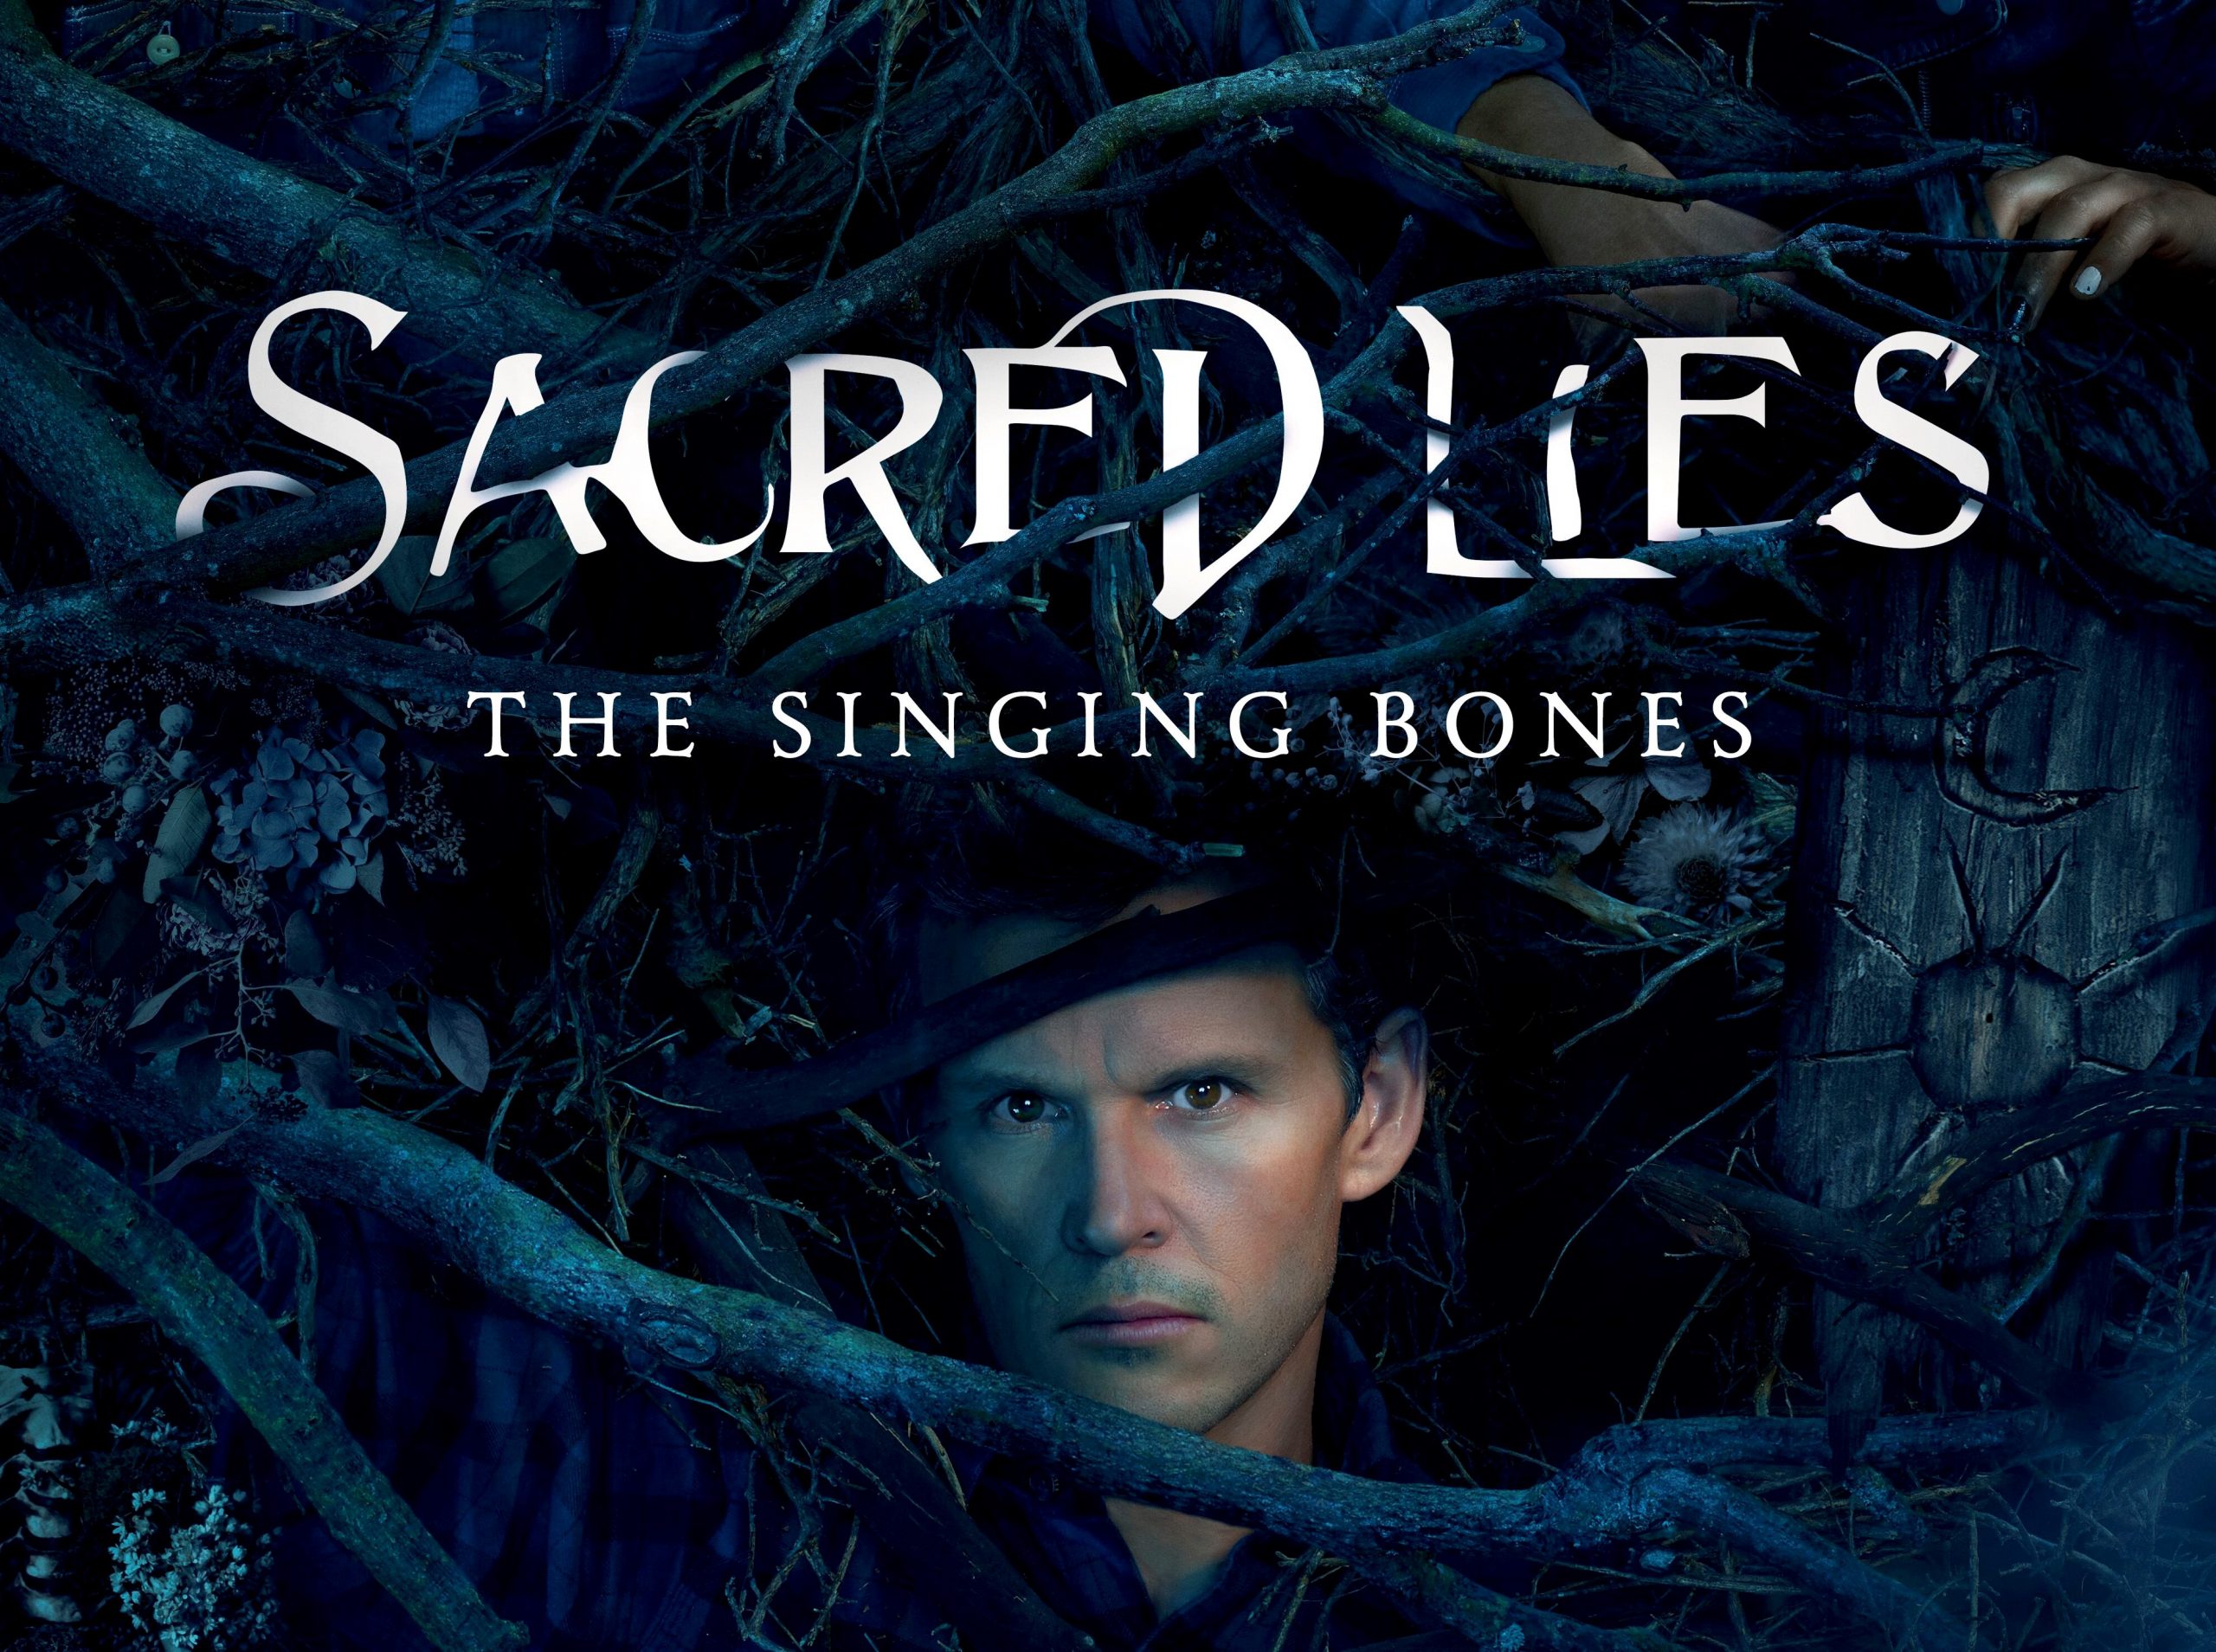 [Article] SACRED LIES: THE SINGING BONES Returns to Facebook Watch with a Grimm New Season